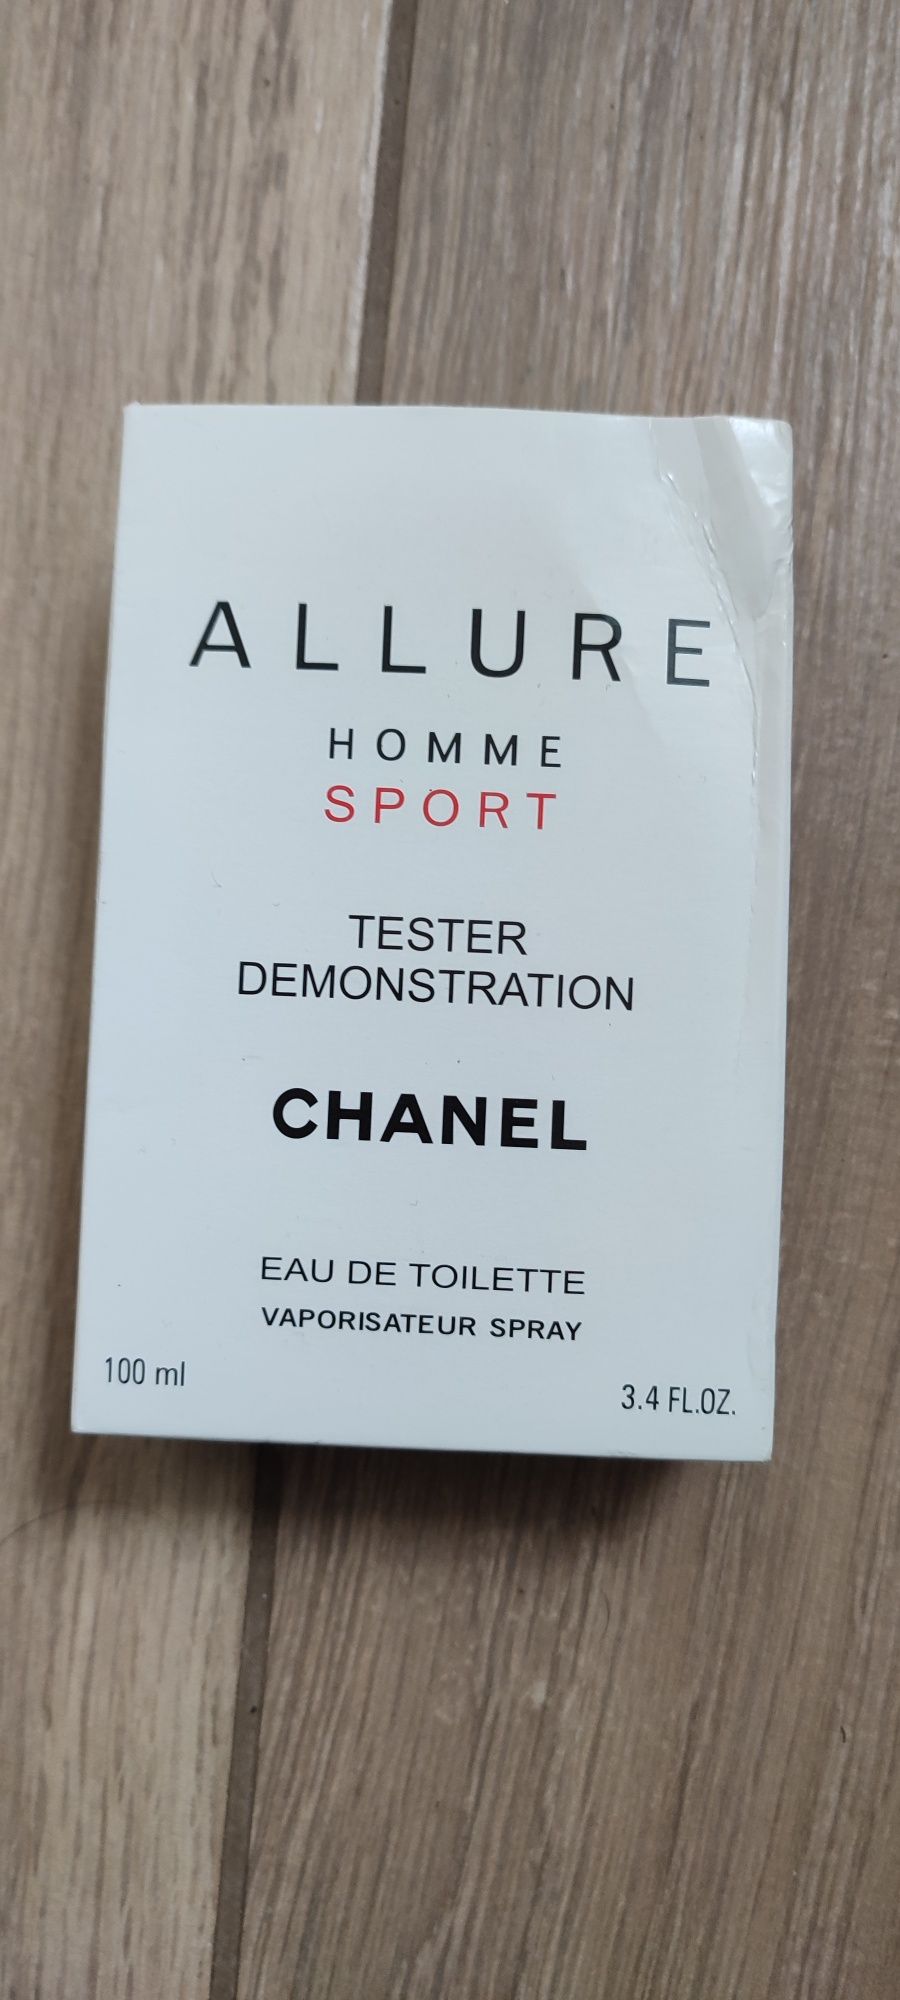 Allure homme sport